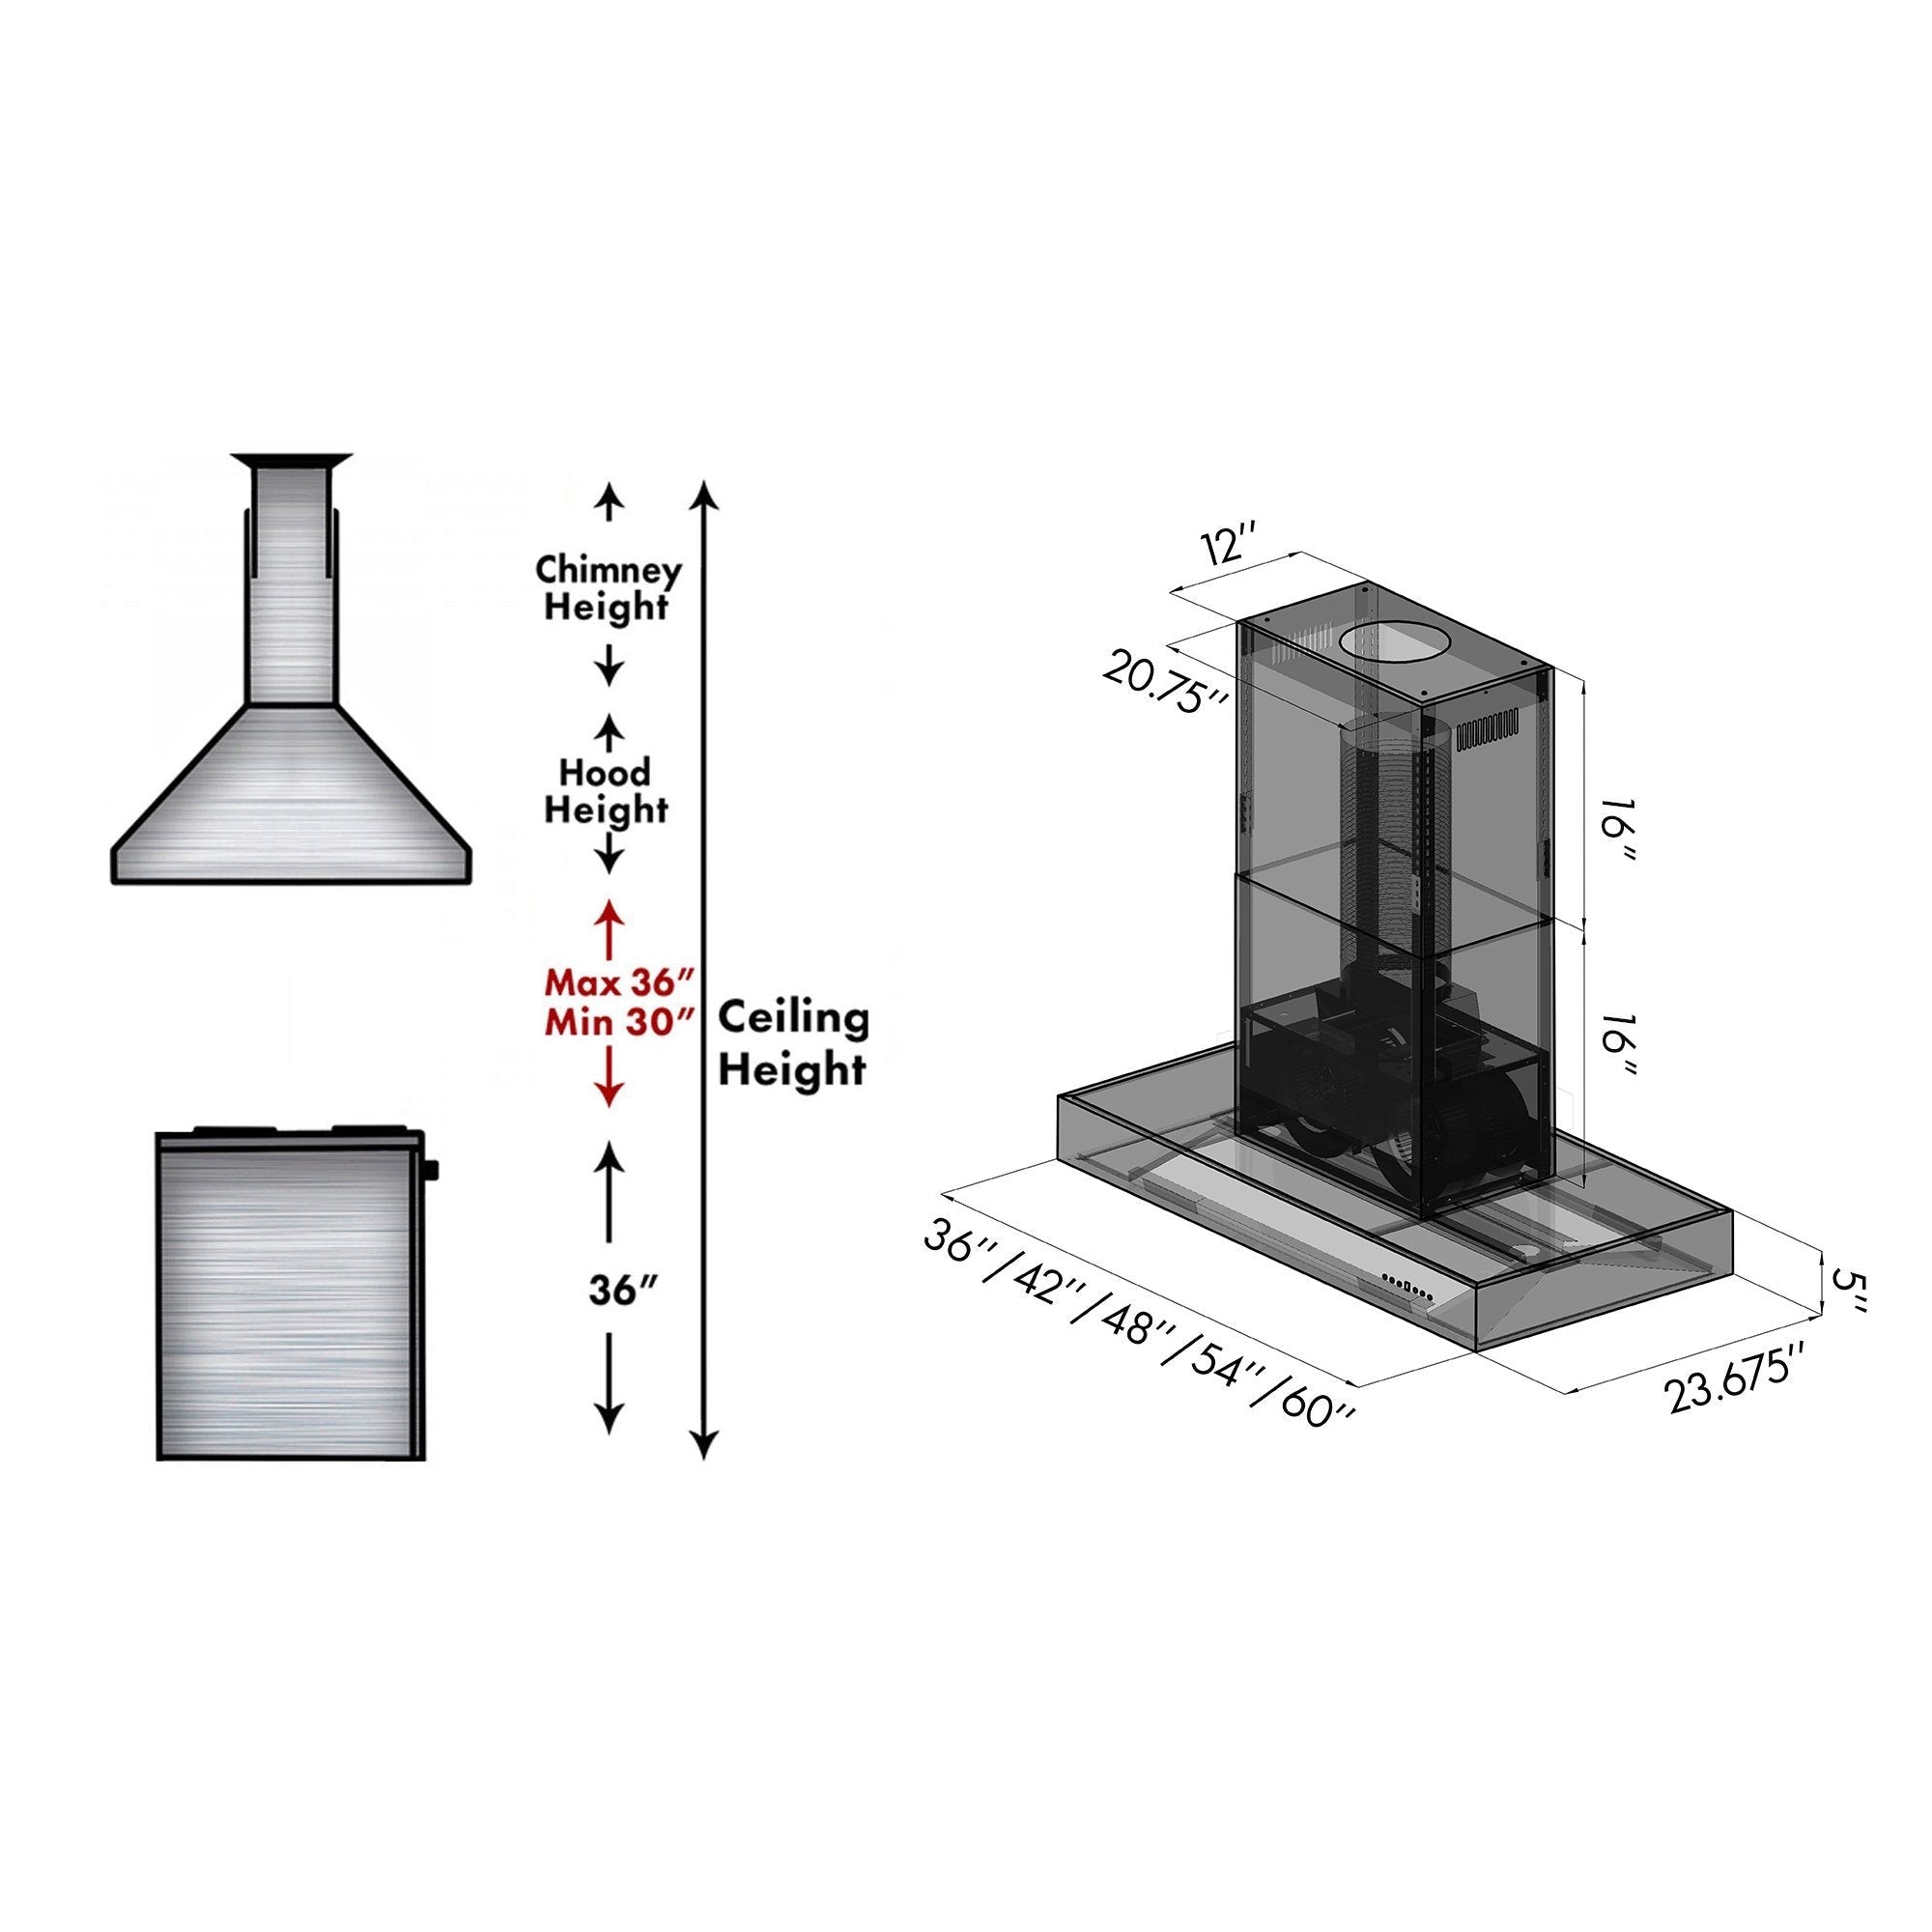 ZLINE Ducted Outdoor Island Mount Range Hood in Stainless Steel (KECOMi-304) chimney height guide and dimensions.